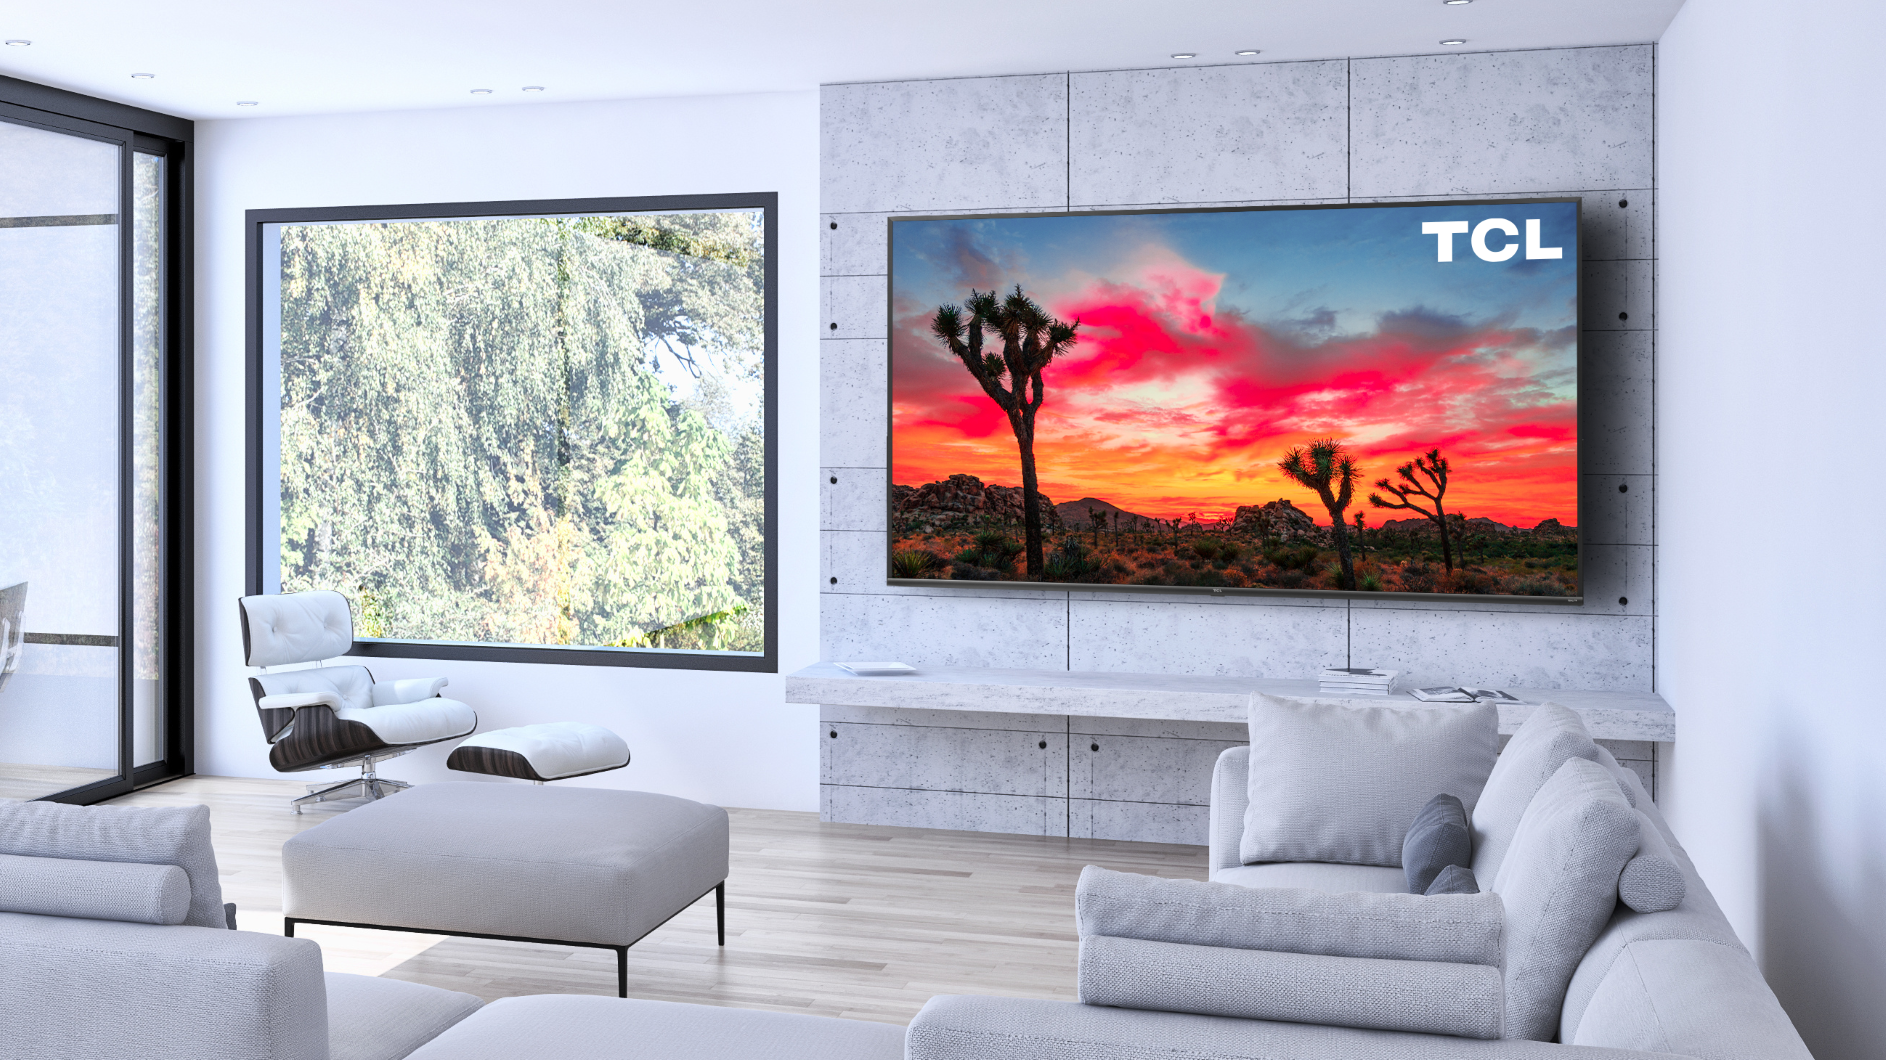 Tcls Massive 85 Inch 4k Smart Tv Can Be Yours For A Bargain Price Maxim